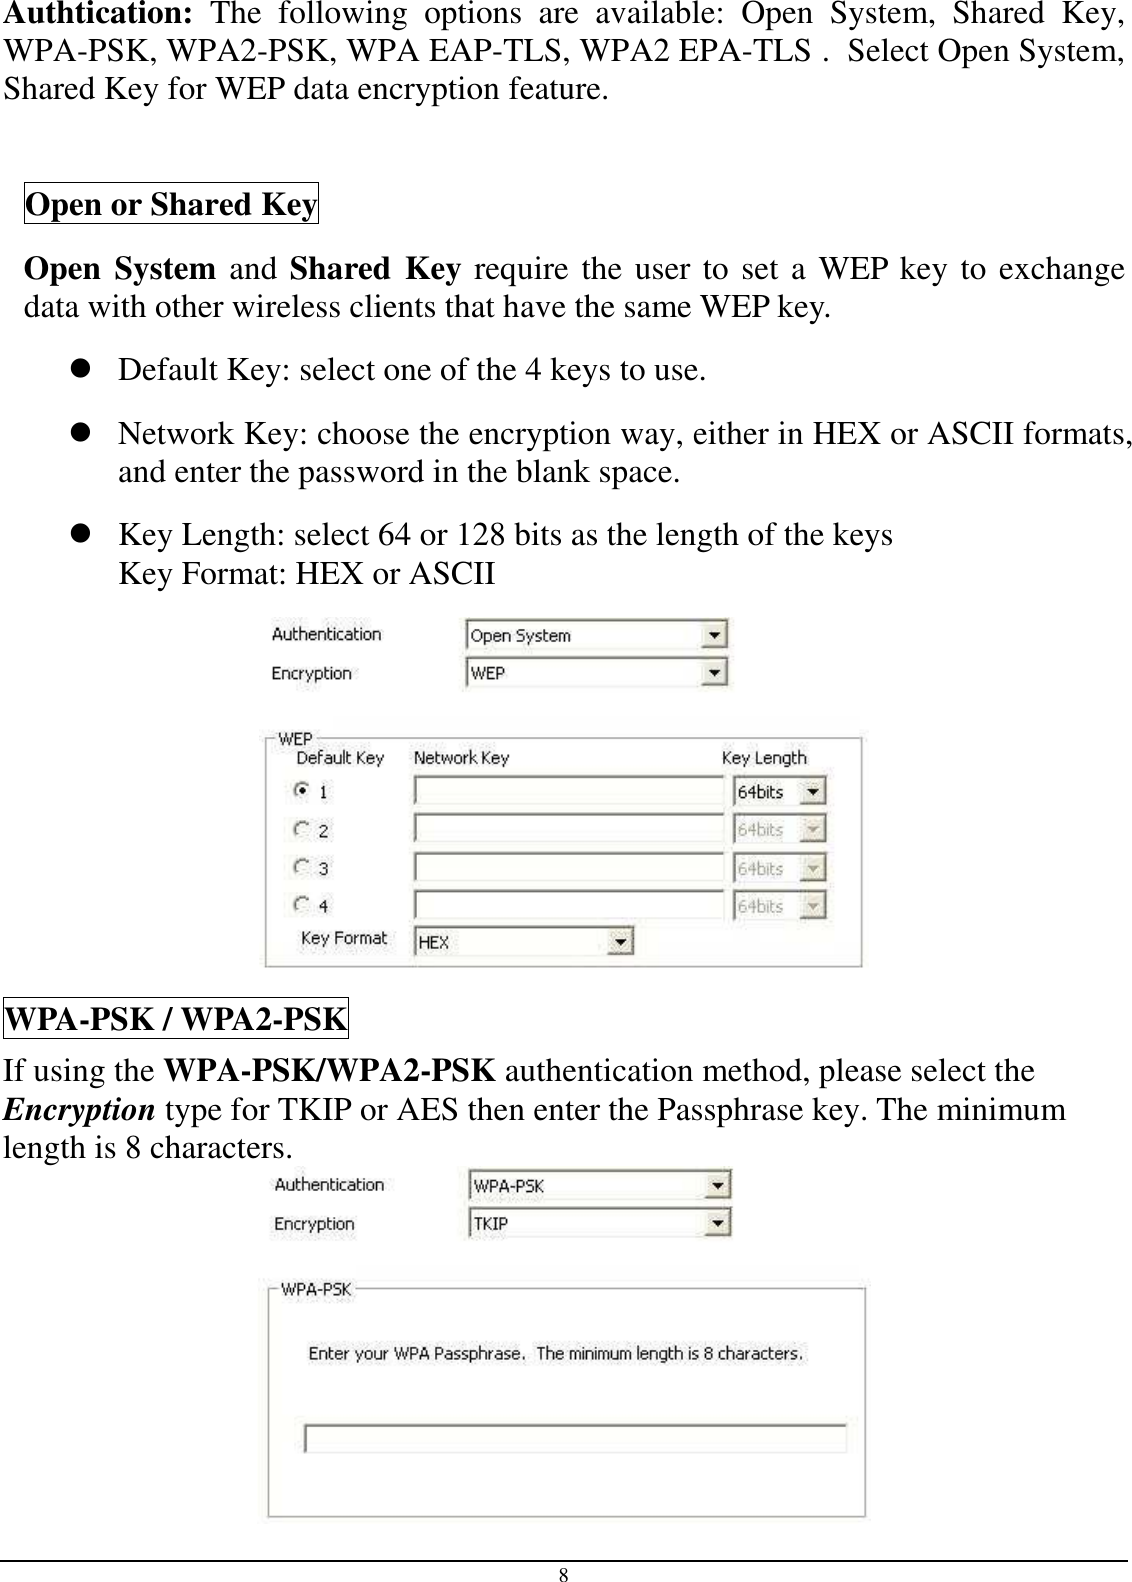 8 Authtication:  The  following  options  are  available:  Open  System,  Shared  Key, WPA-PSK, WPA2-PSK, WPA EAP-TLS, WPA2 EPA-TLS .  Select Open System, Shared Key for WEP data encryption feature.  Open or Shared Key Open System and Shared Key require the user to set a WEP key to exchange data with other wireless clients that have the same WEP key.  Default Key: select one of the 4 keys to use.  Network Key: choose the encryption way, either in HEX or ASCII formats, and enter the password in the blank space.   Key Length: select 64 or 128 bits as the length of the keys Key Format: HEX or ASCII  WPA-PSK / WPA2-PSK If using the WPA-PSK/WPA2-PSK authentication method, please select the Encryption type for TKIP or AES then enter the Passphrase key. The minimum length is 8 characters.  